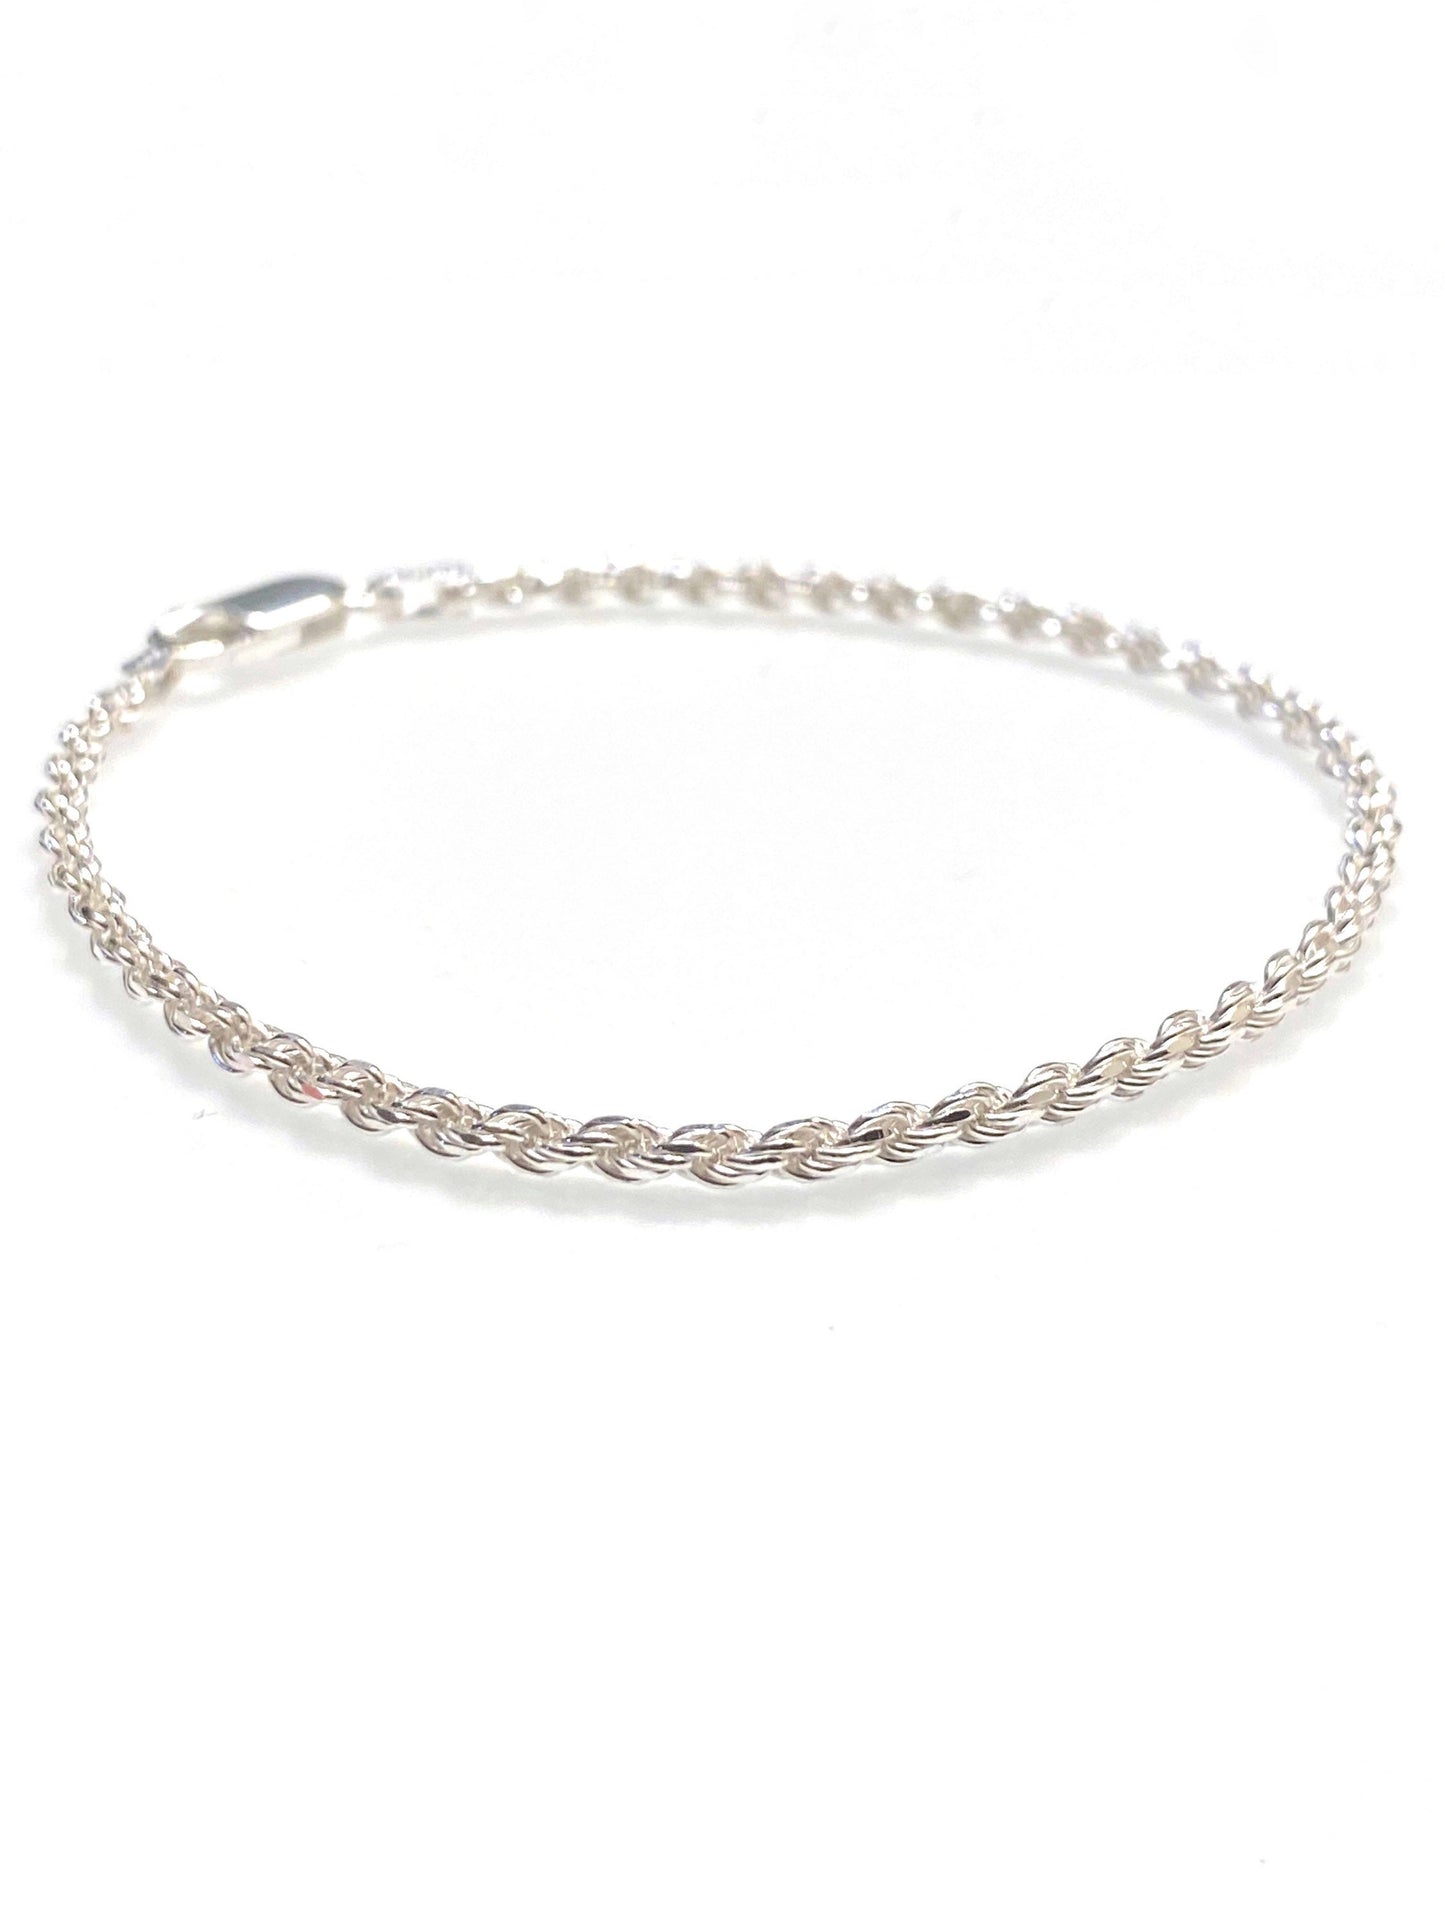 Rope chain bracelet (sterling silver)